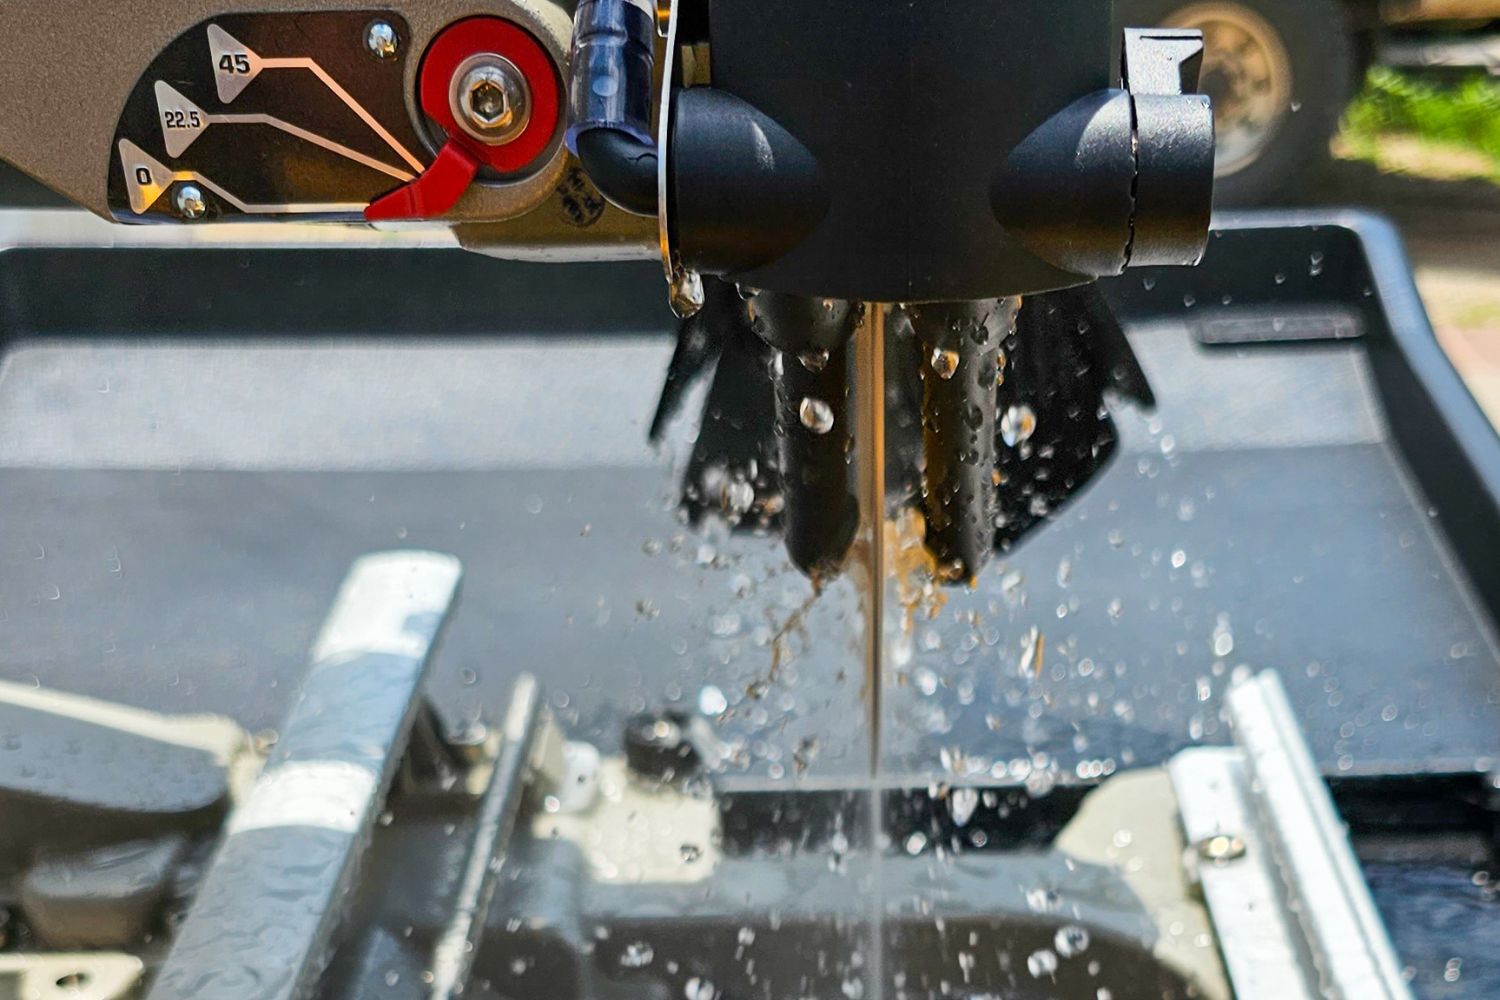 A close up of the blade of the DeWalt 10-inch wet tile saw spinning while water sprays onto it